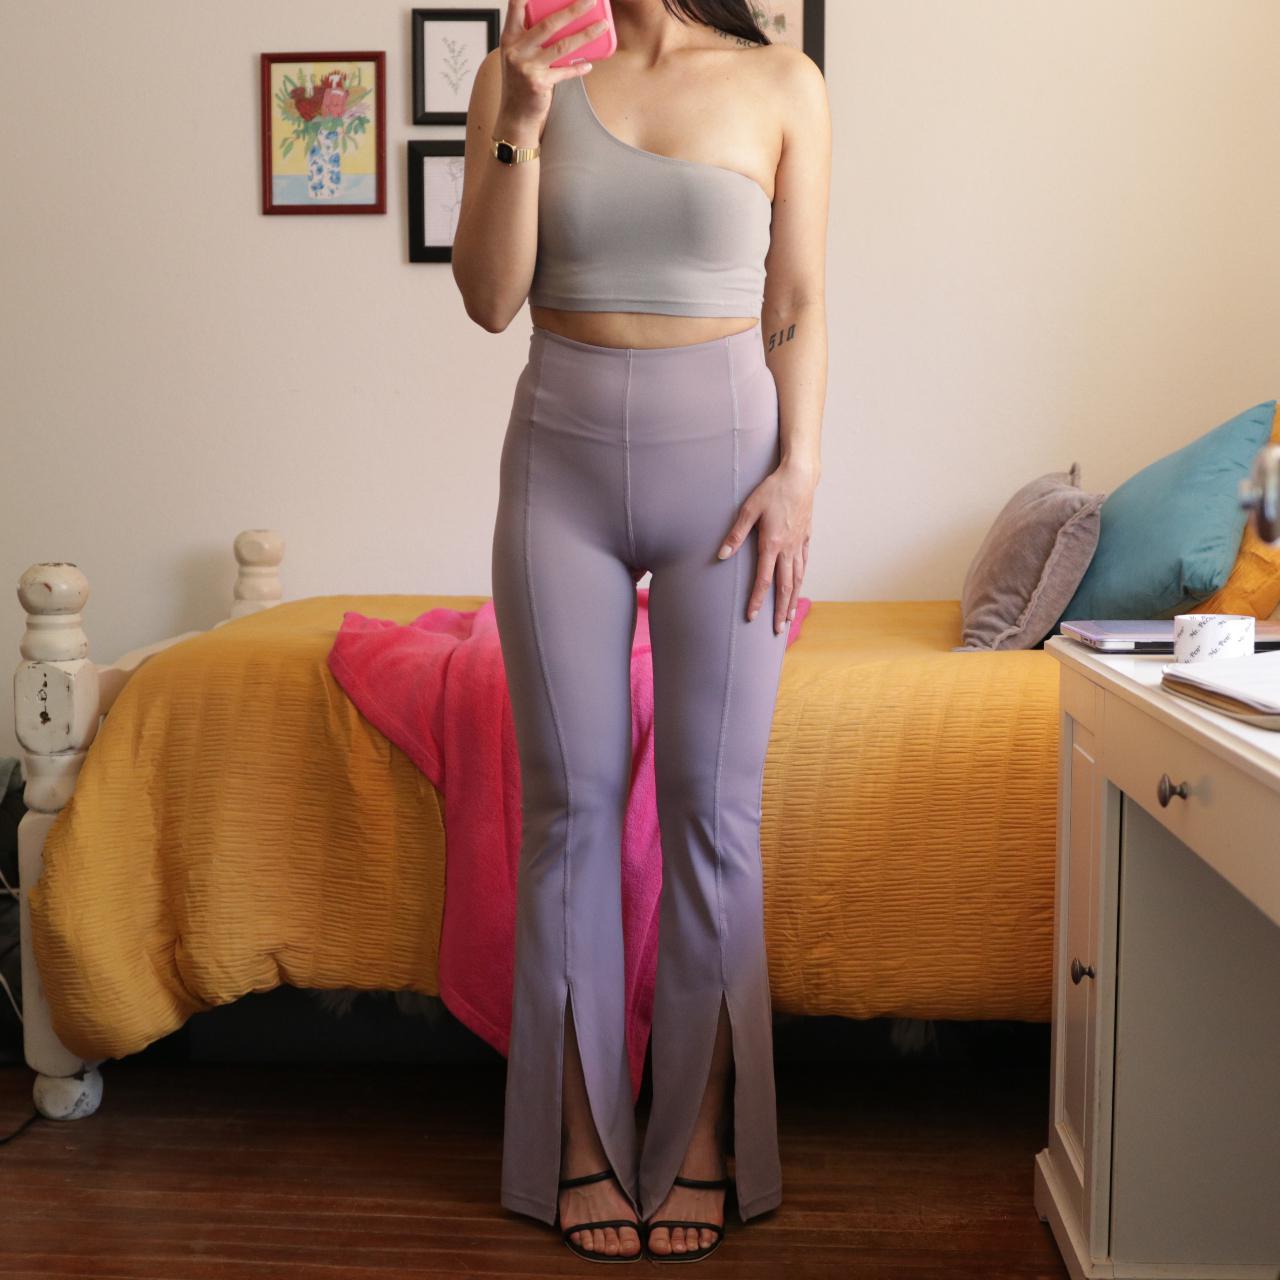 Lululemon In the Groove Slit Flare Pant in the color - Depop